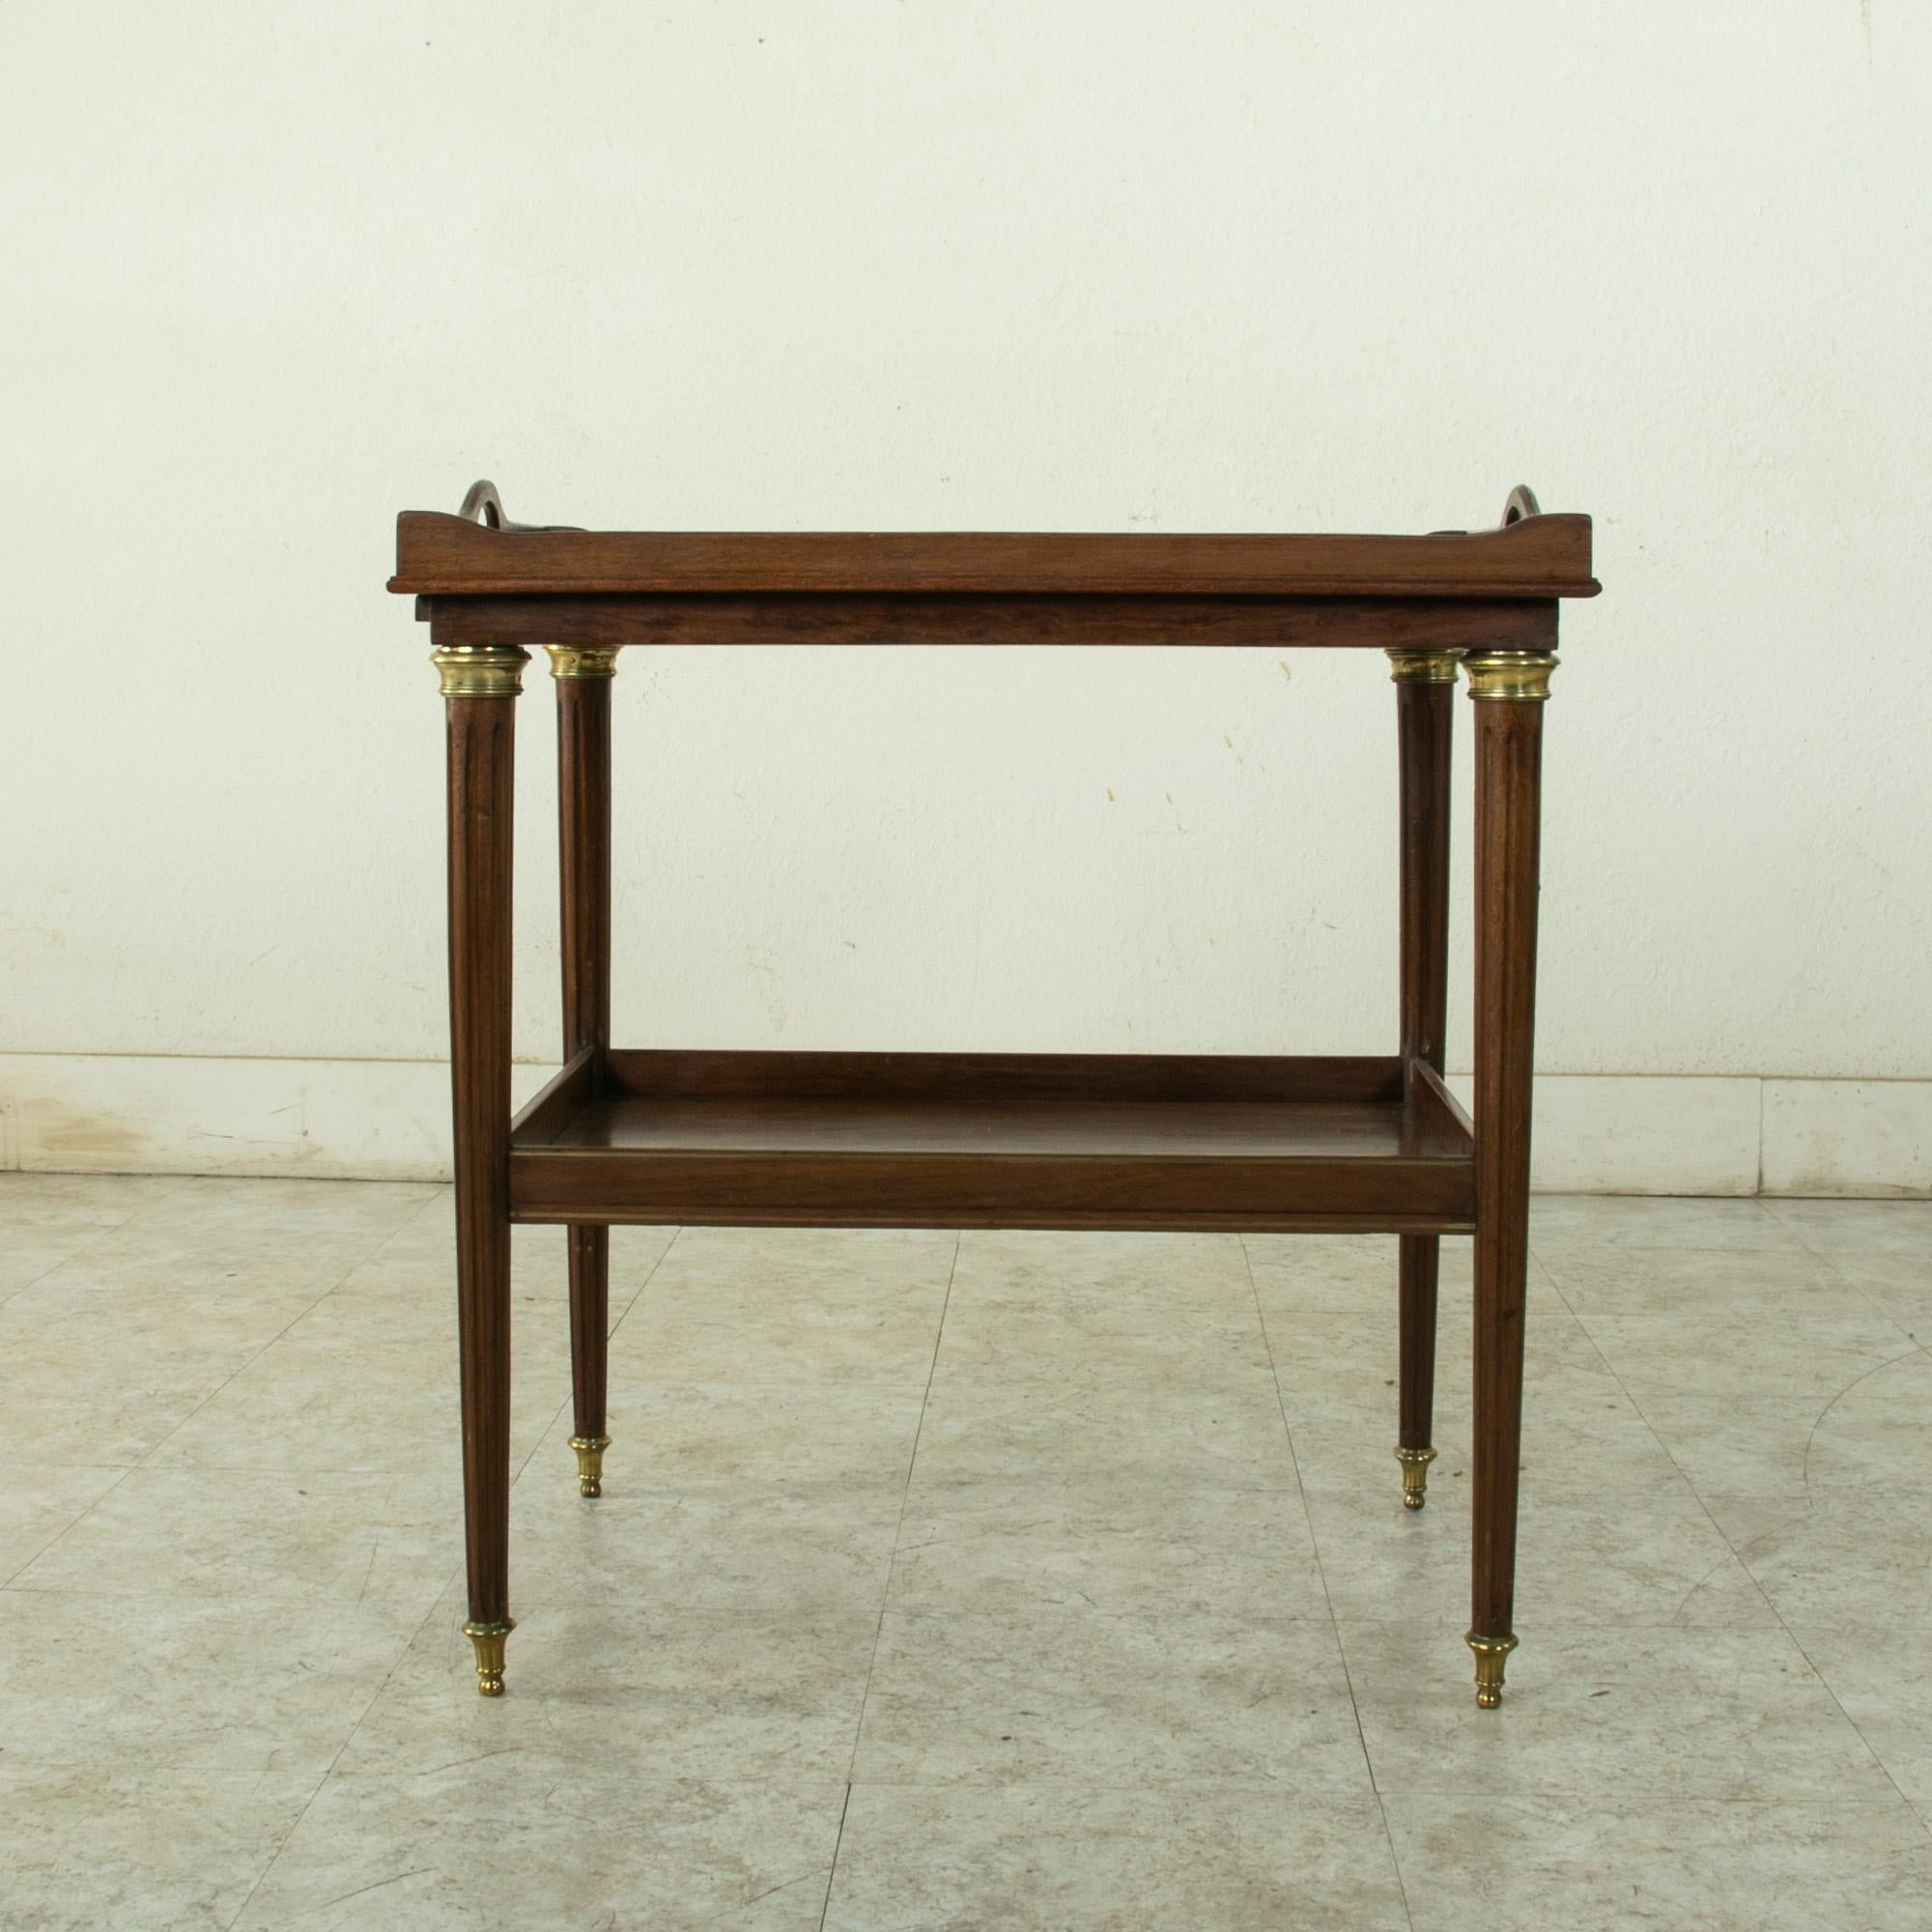 Late 19th Century French Louis XVI Style Mahogany Tray Table with Bronze Details For Sale 1